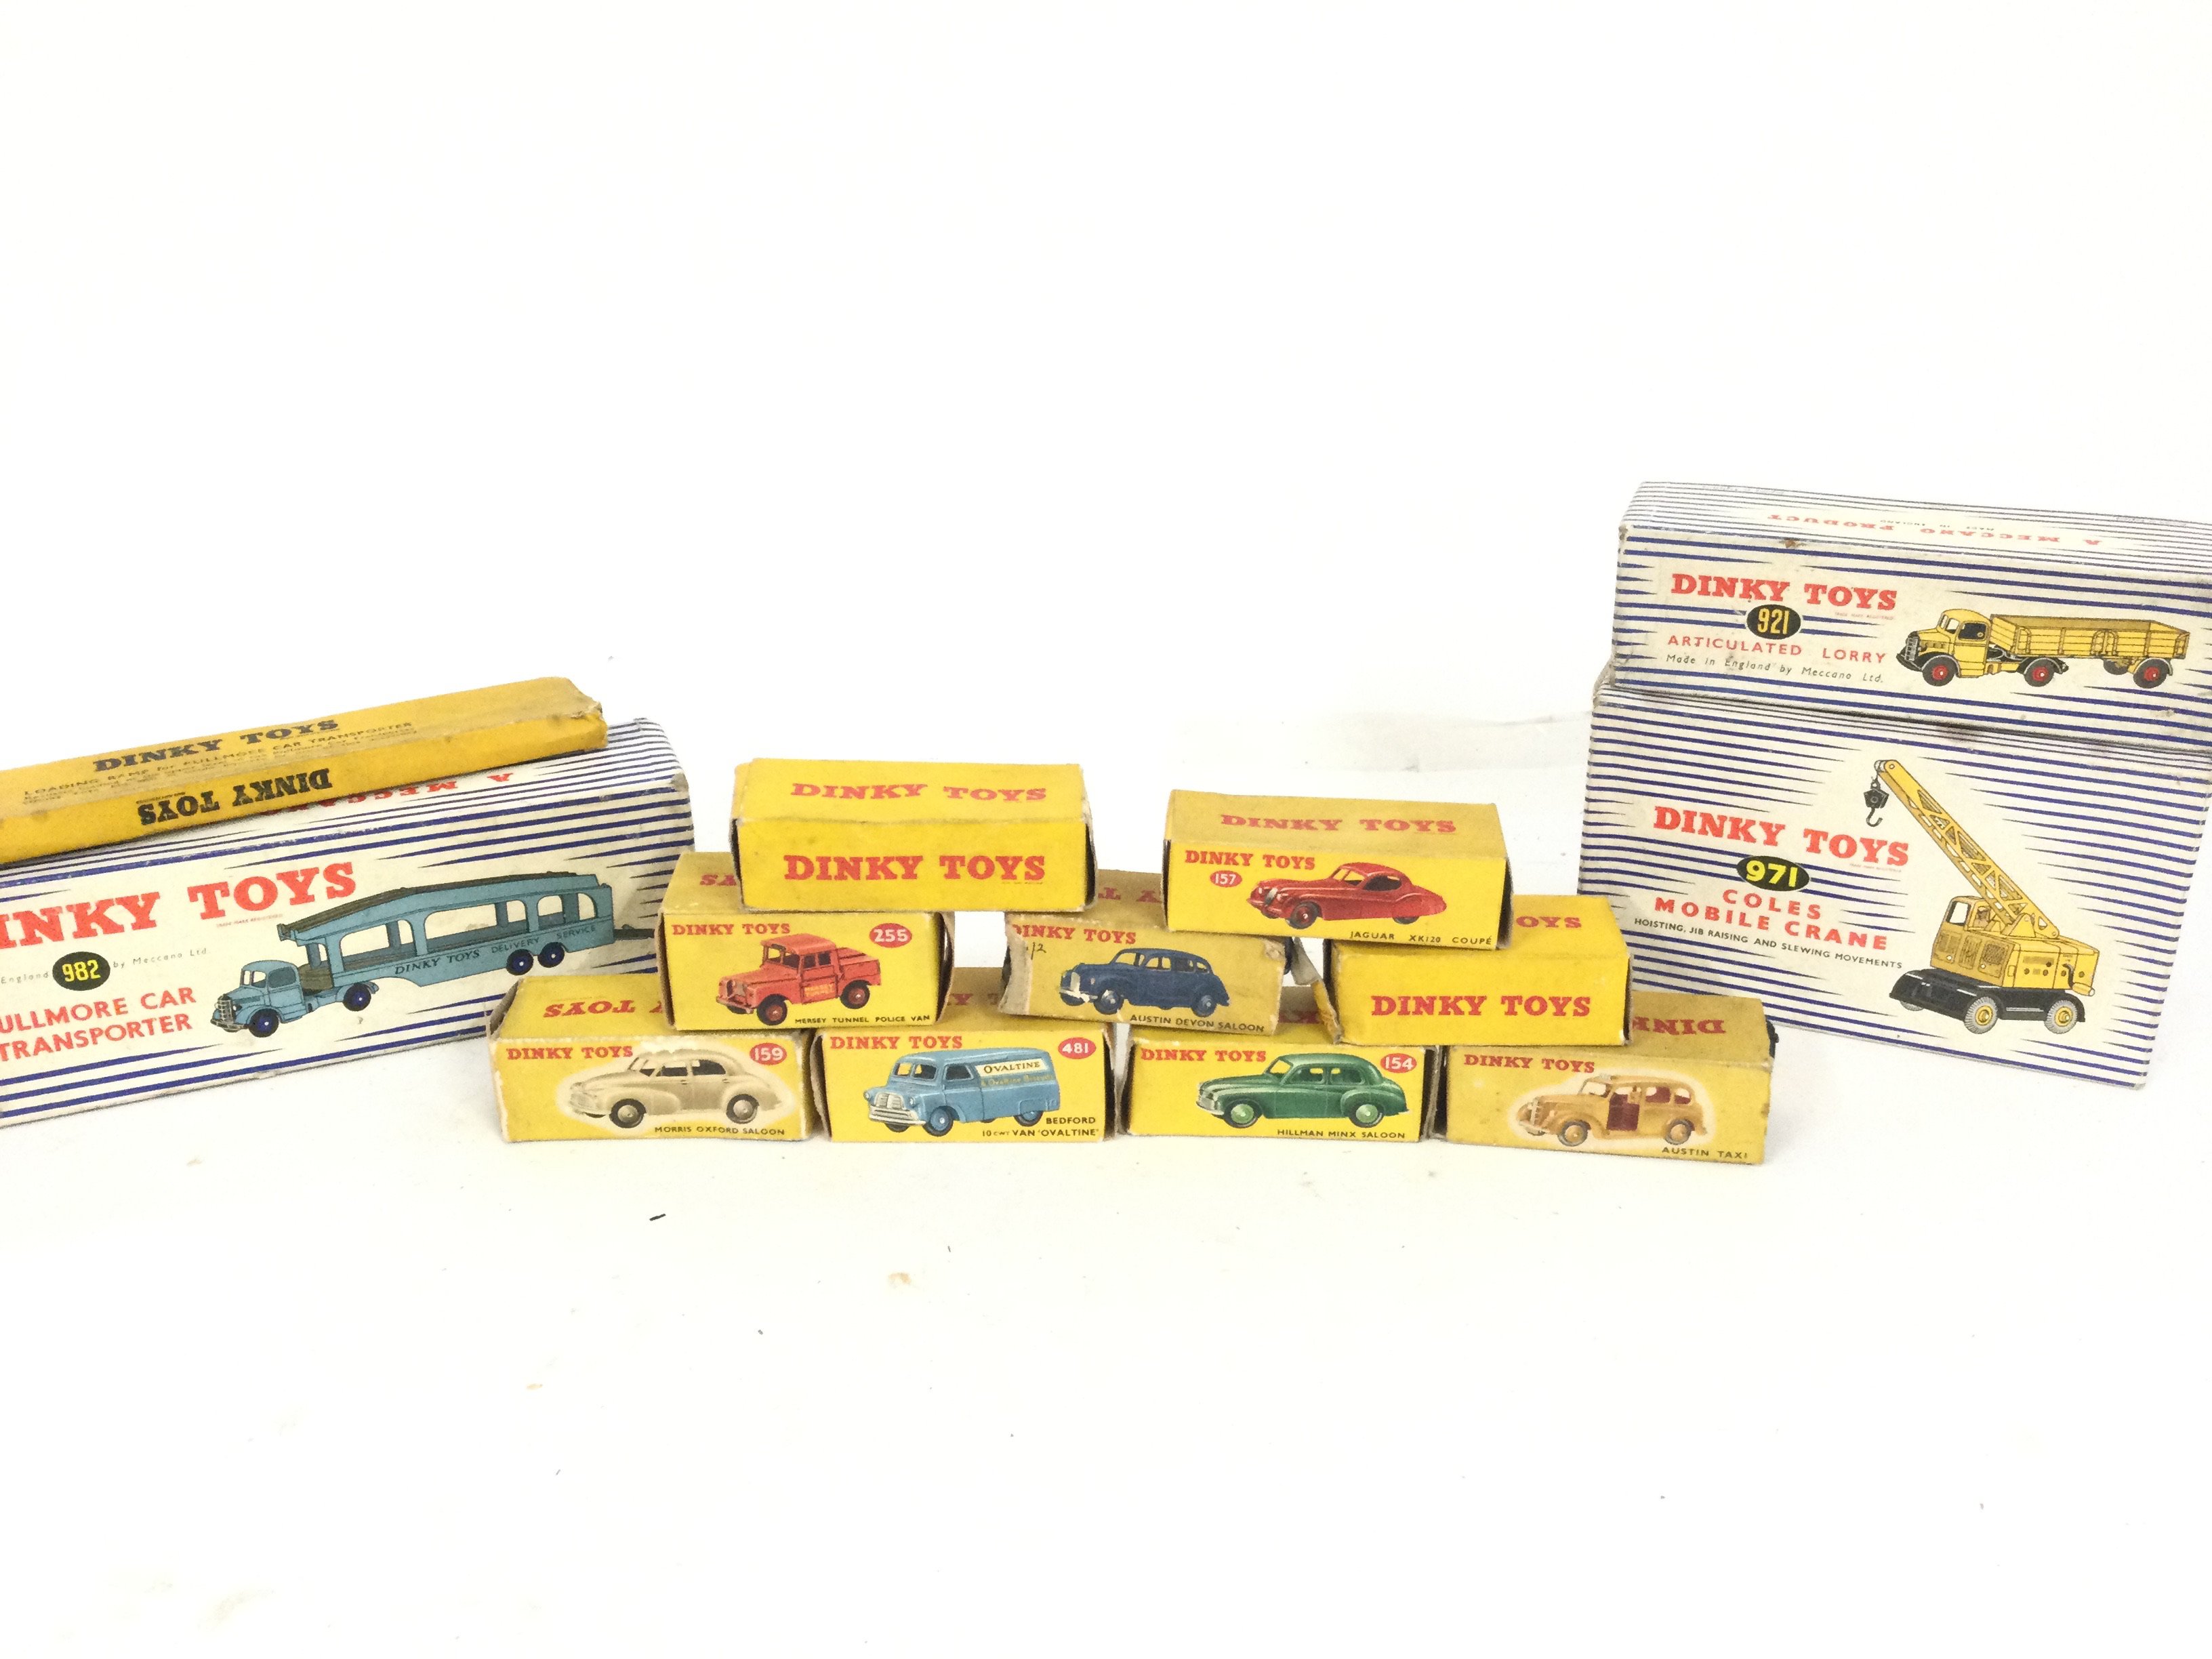 A Collection of Boxed Dinky Toys Including Pullmore Car Transporter. Coles Mobile Crane. Articulated